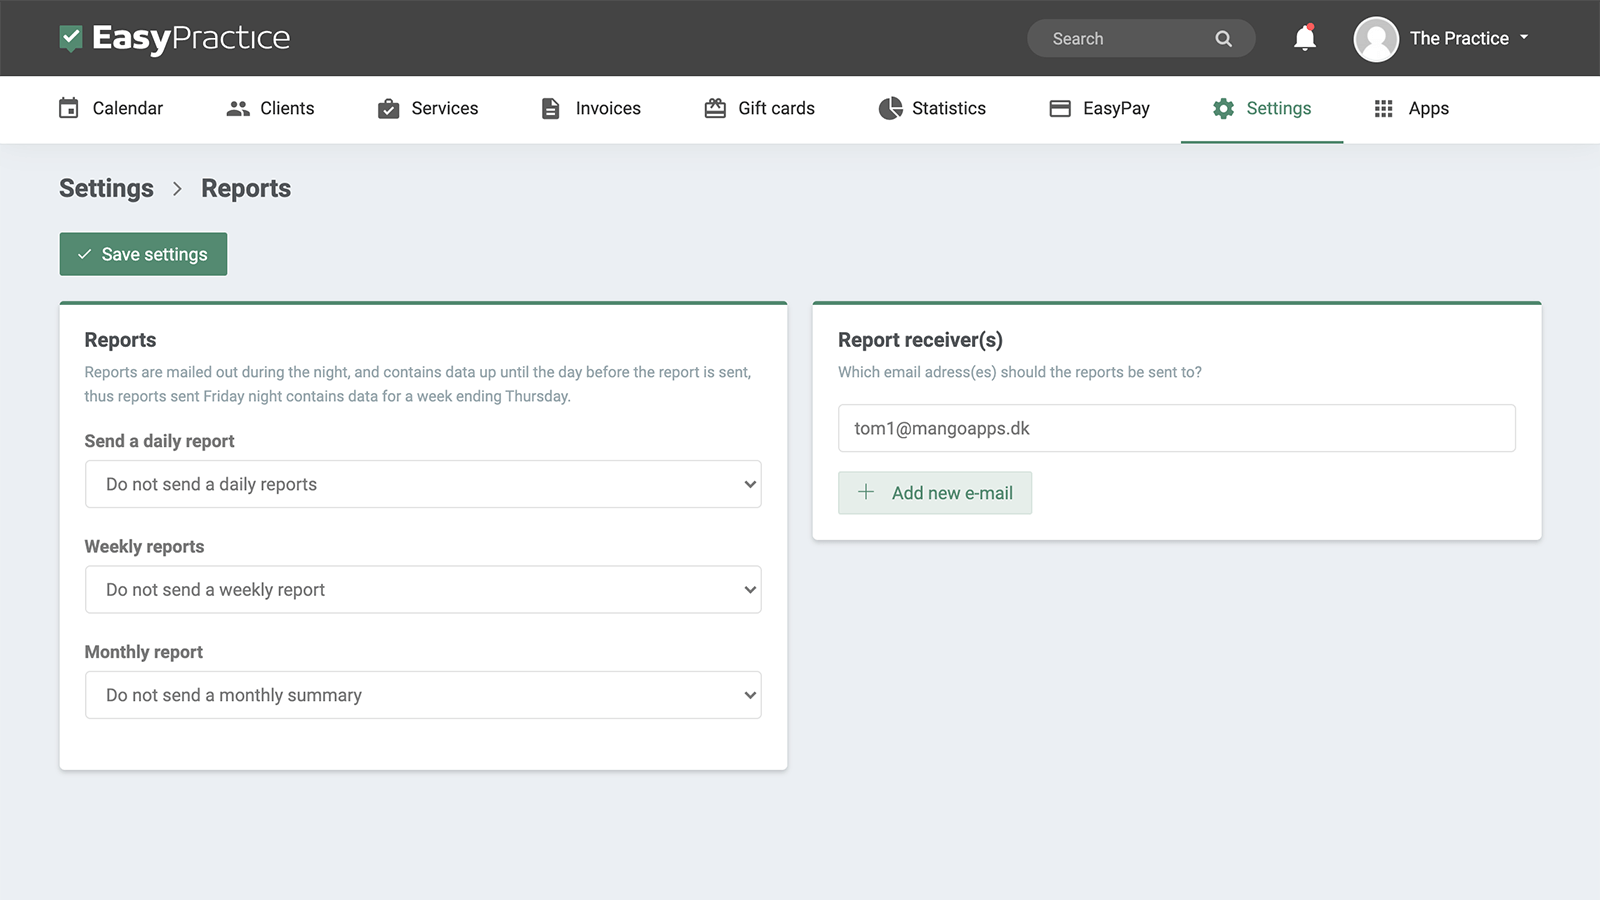 Stay up-to-date with the report feature